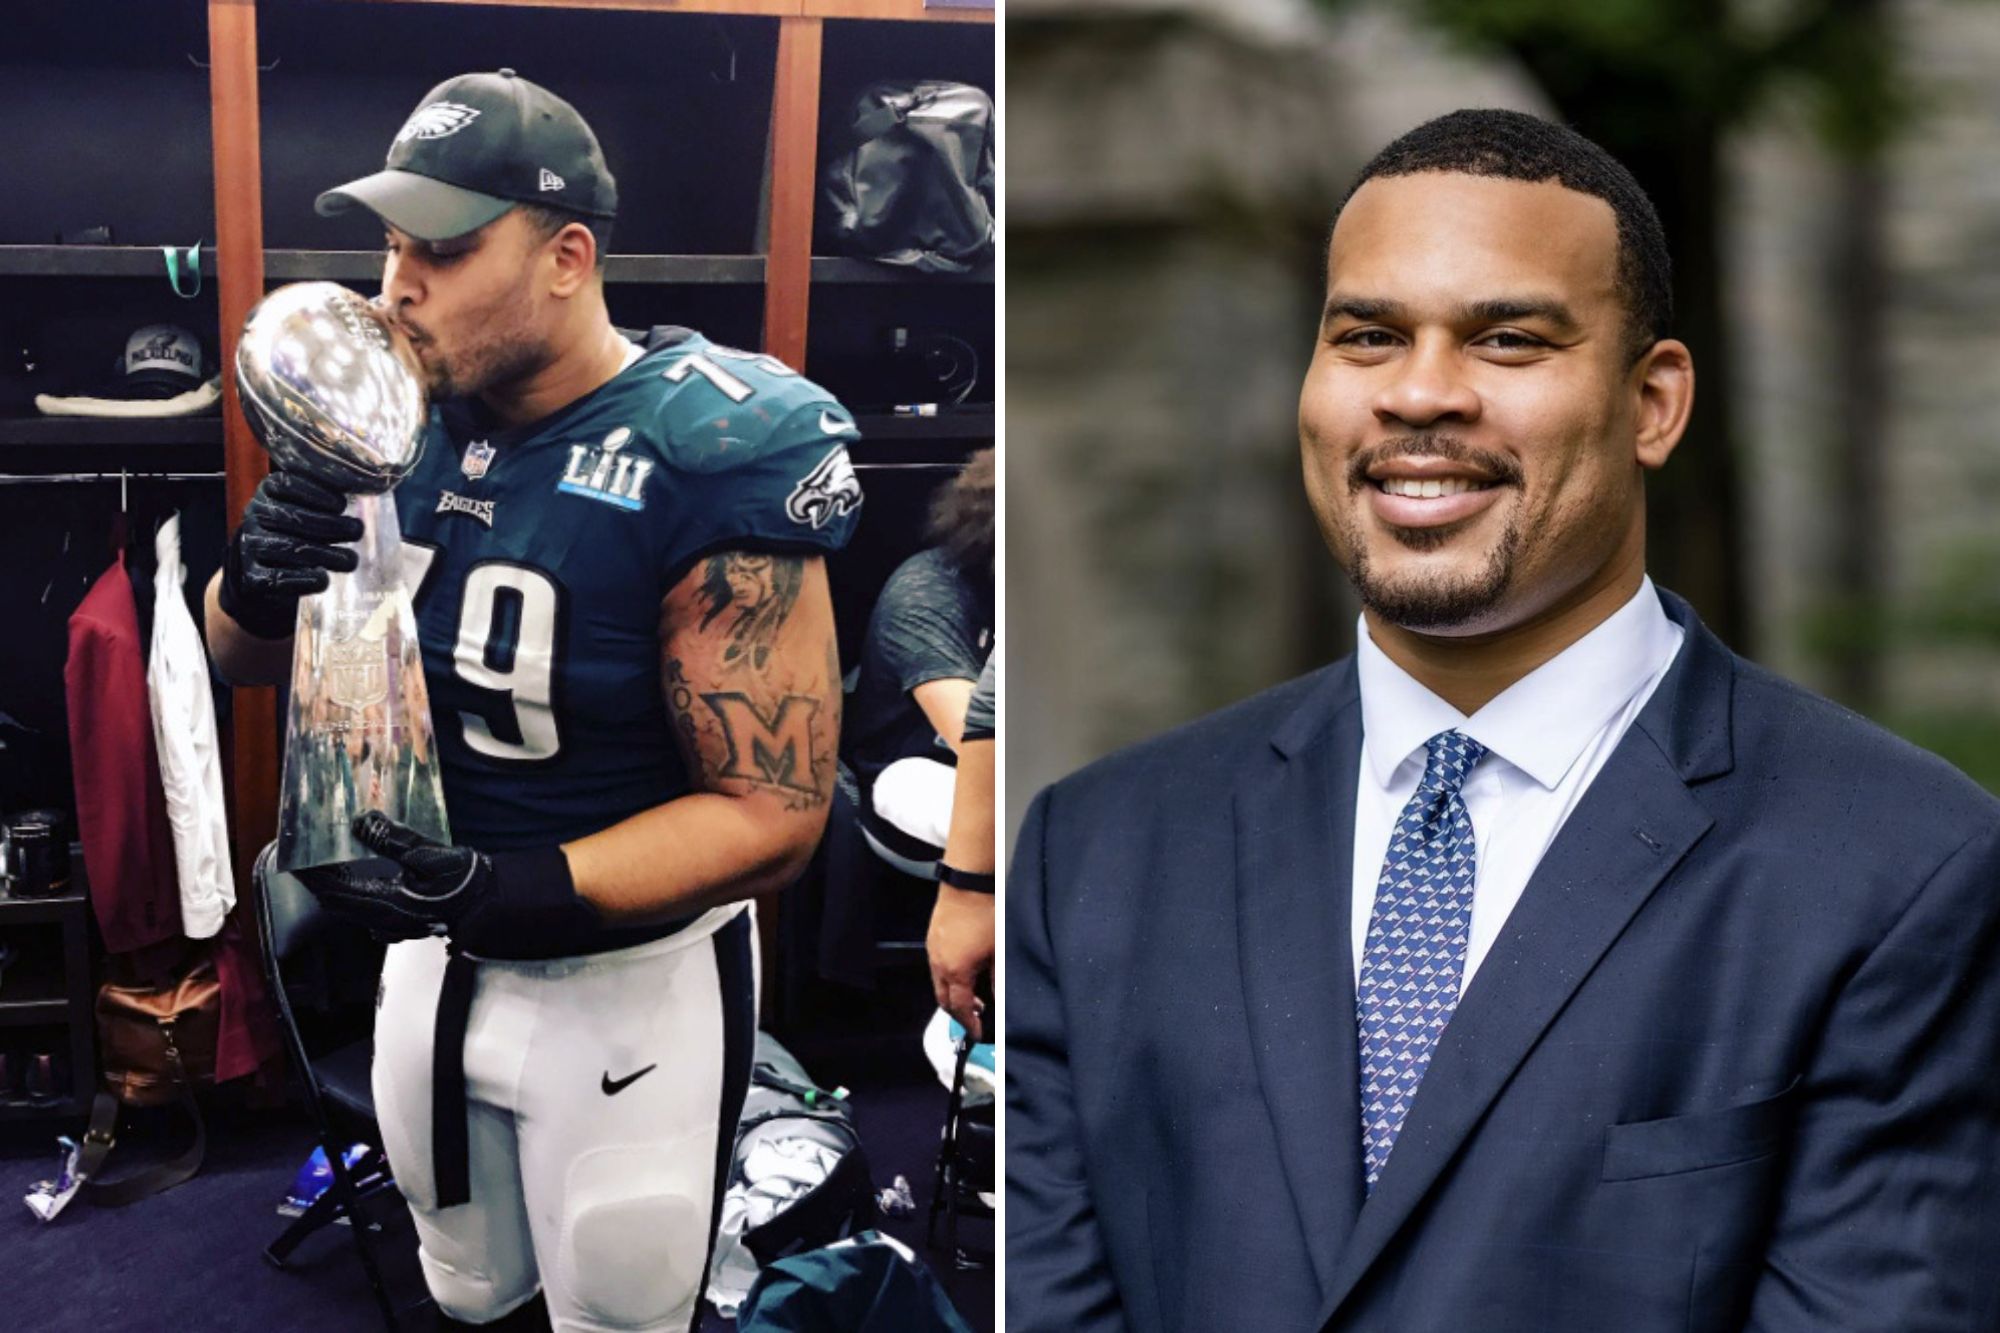 Left, Brandon Brooks kisses a Super Bowl trophy in his Eagles uniform, at right, Brooks in a suit.